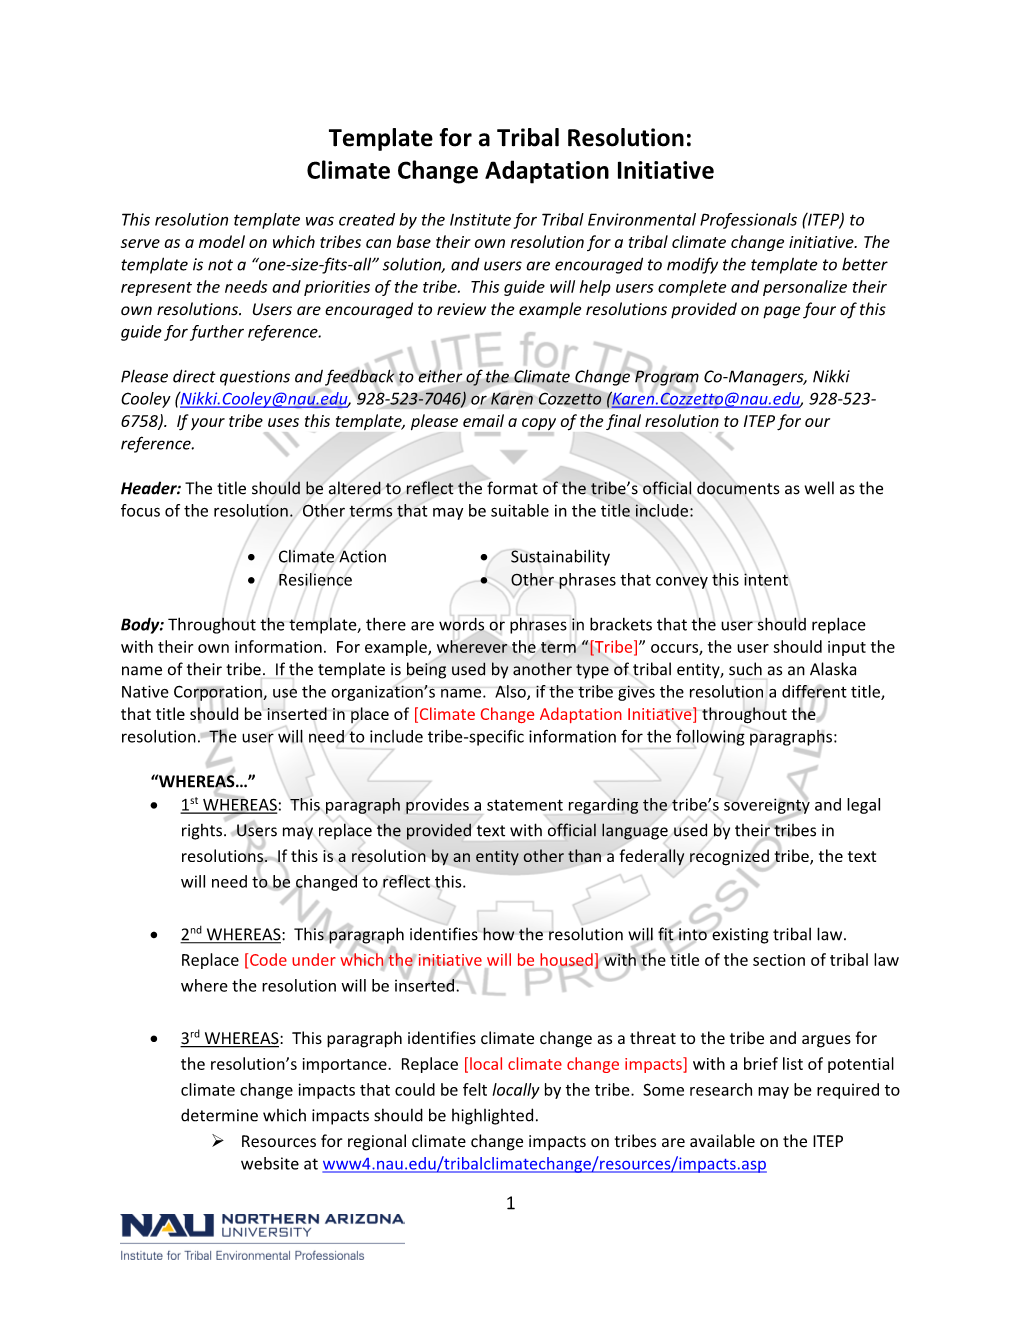 Template for a Tribal Resolution: Climate Change Adaptation Initiative